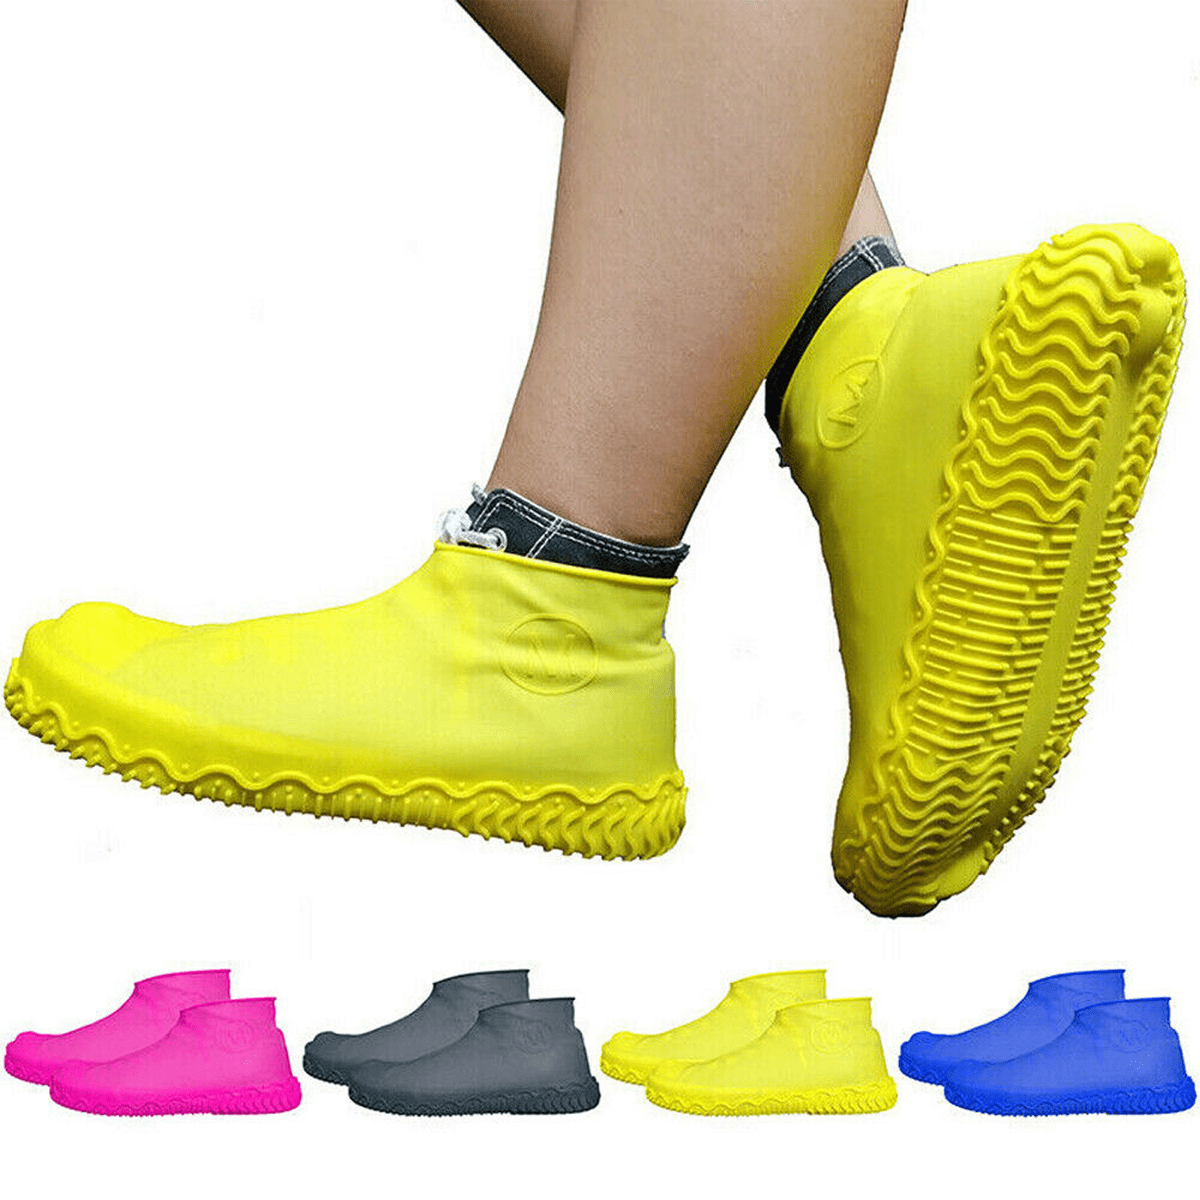 1 Pair Unisex Silicone Waterproof Shoes Cover Reusable Non-slip Rain Boot Tool 